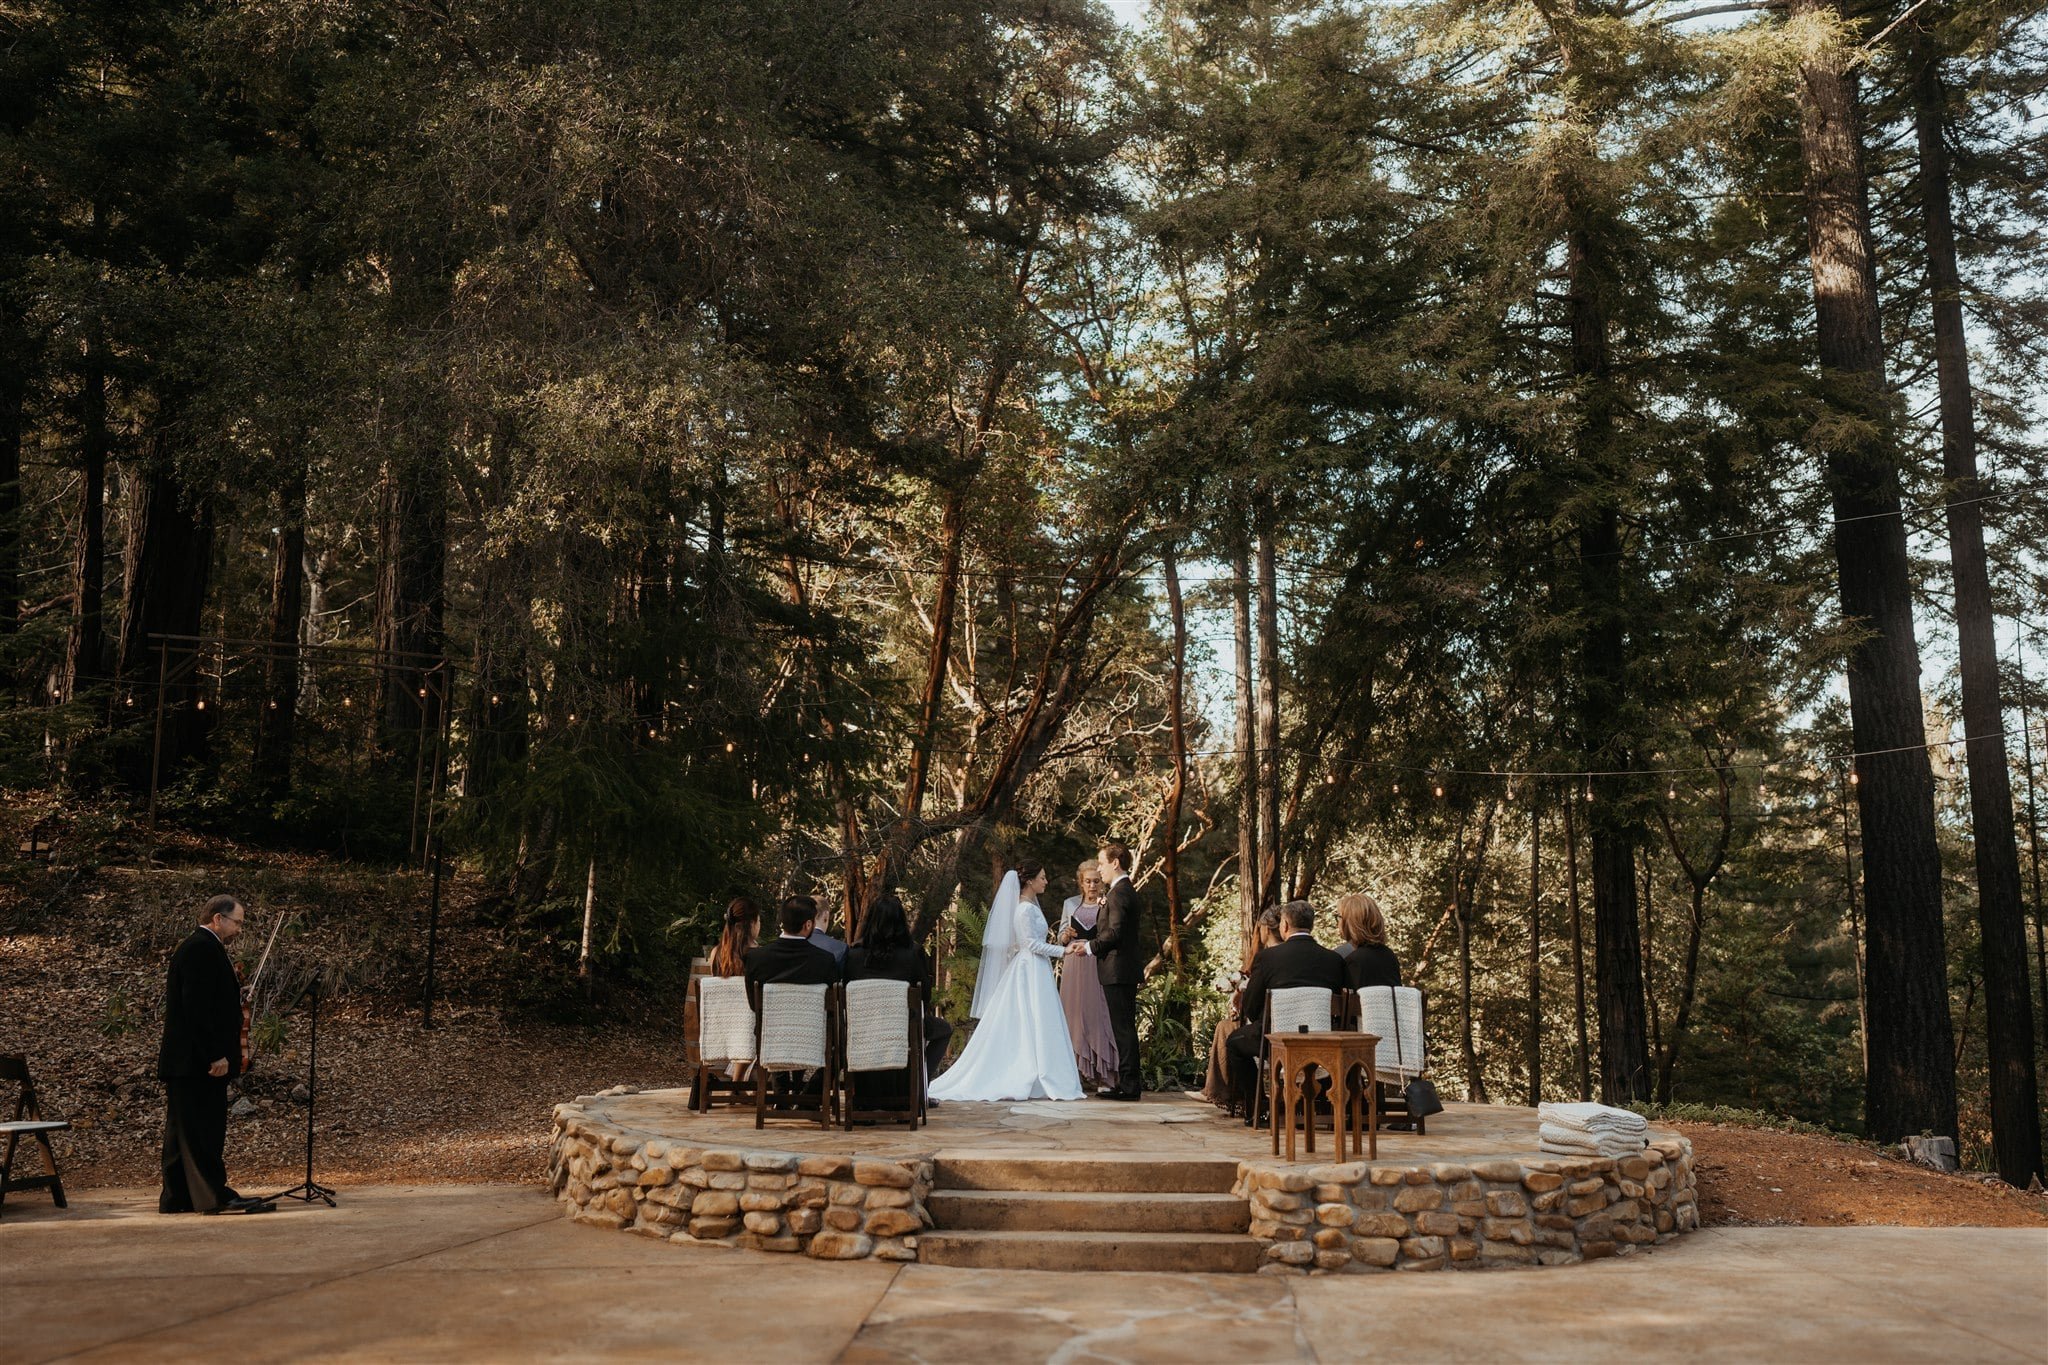 Bride and groom standing at the wedding altar at their California micro wedding at Sequoia Retreat Center